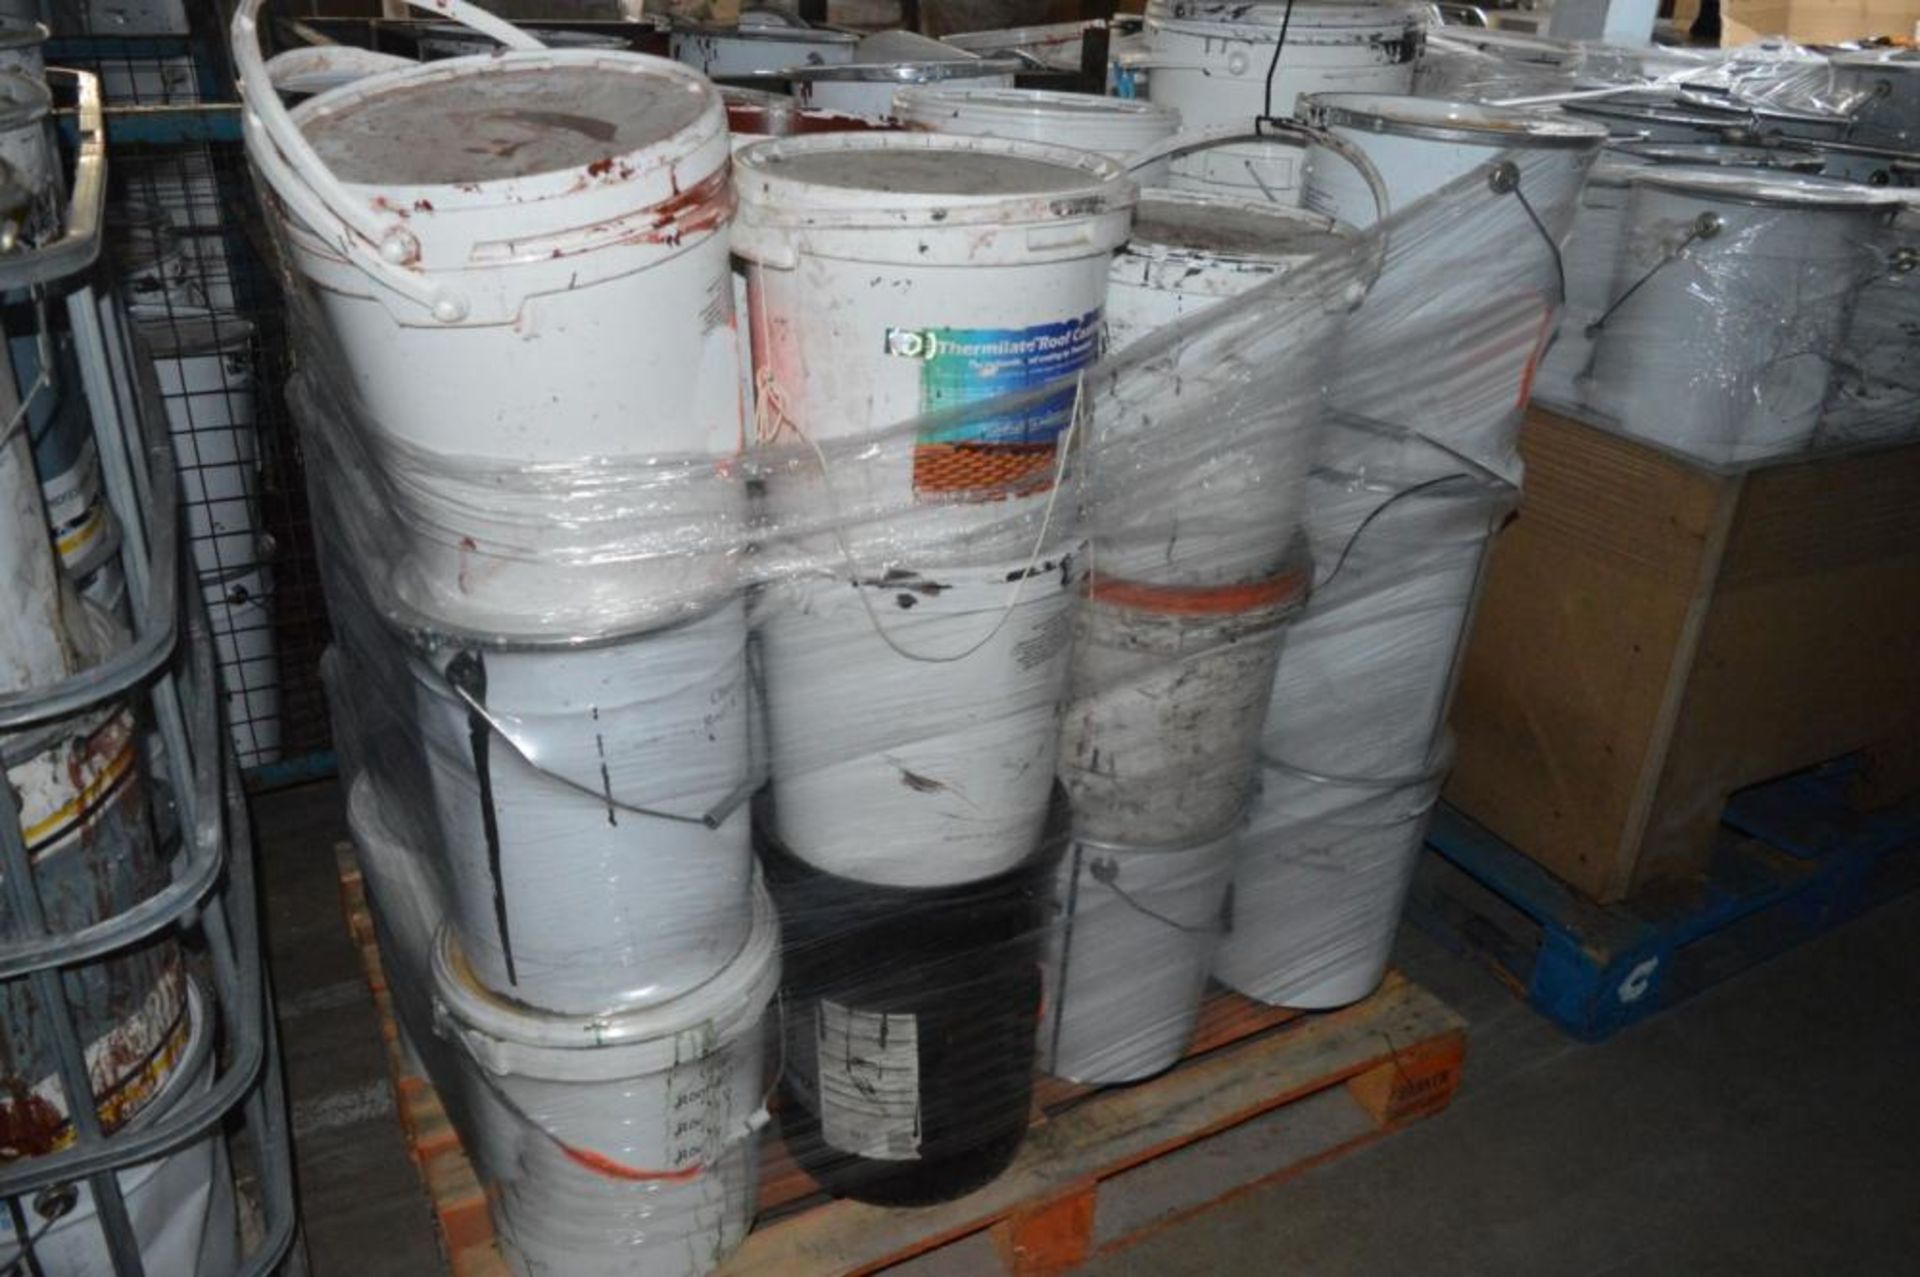 Approx. 36 x 20 Litre Assorted Tins of Paint inc. Roof & Tile, Thermilate + More - Ref: DRT0234 - - Image 3 of 3